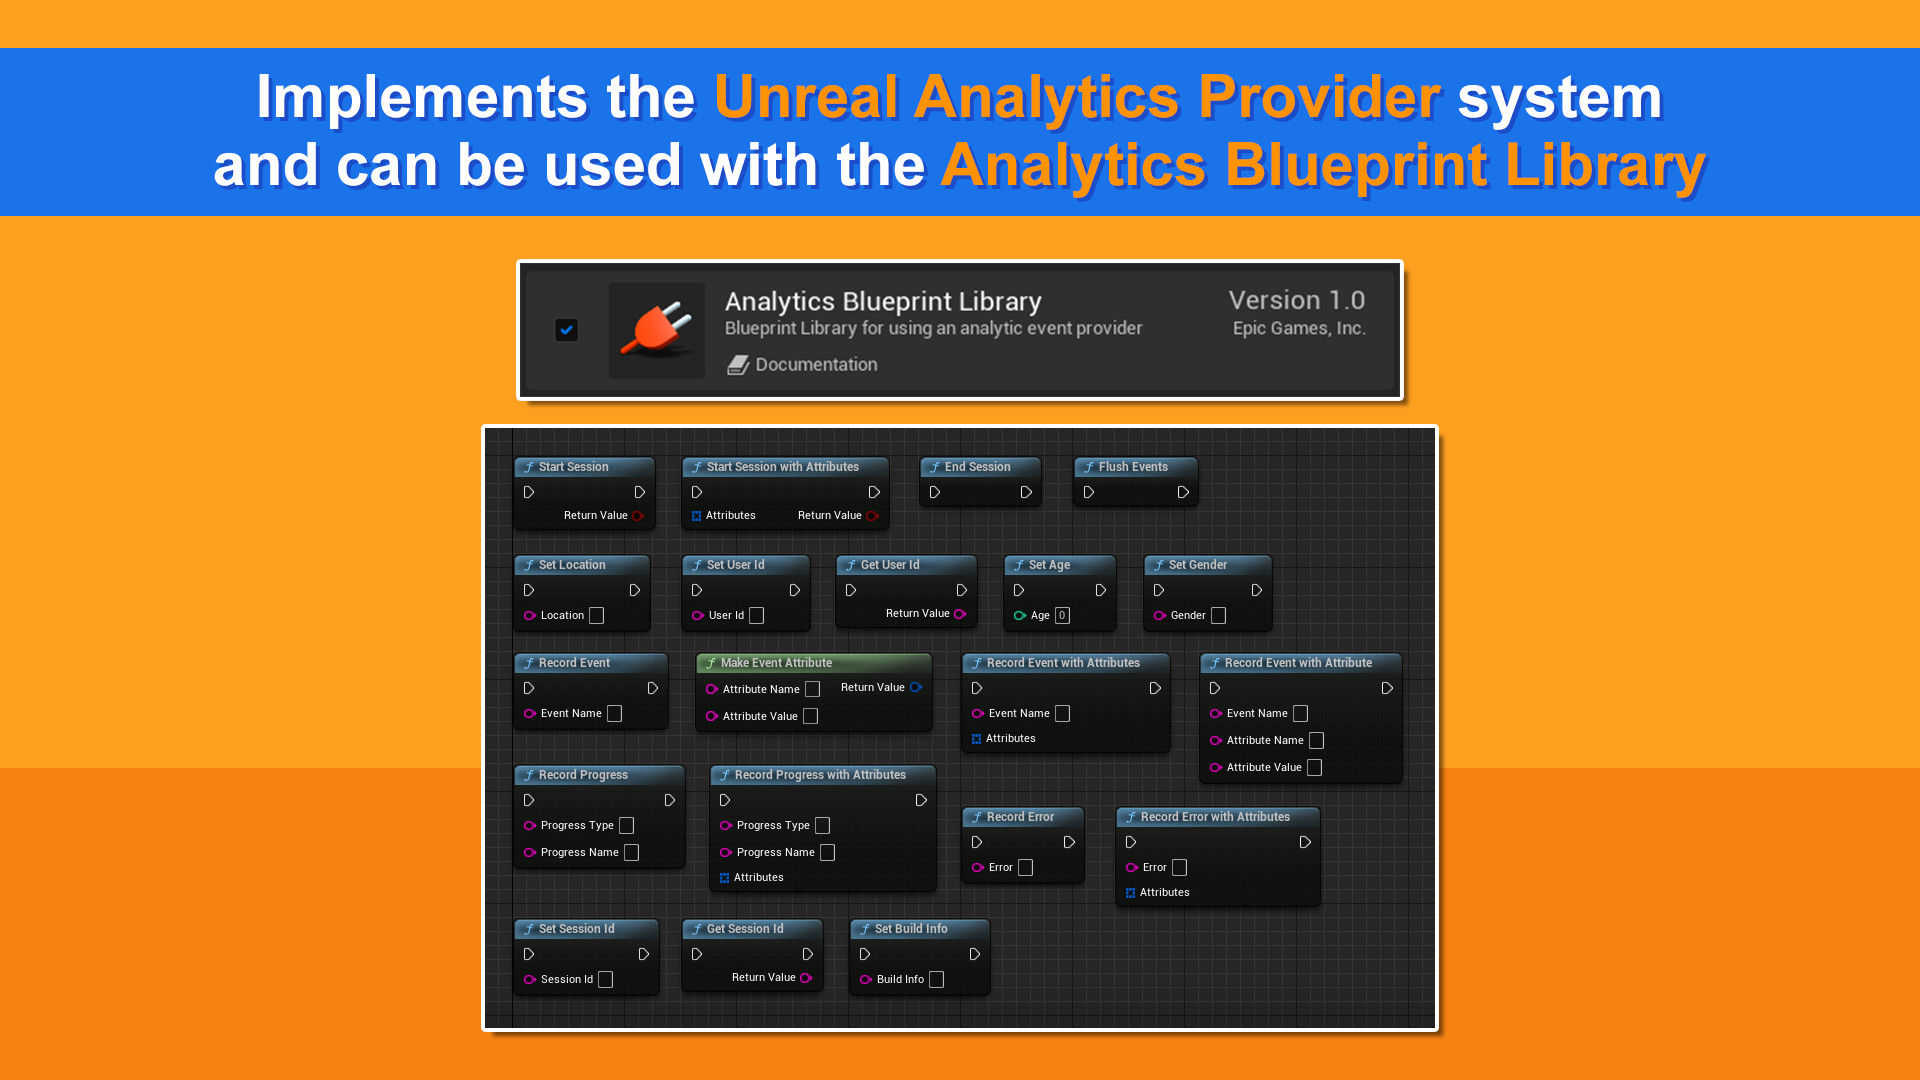 Support both In-Game Analytics and Analytics Blueprint Library